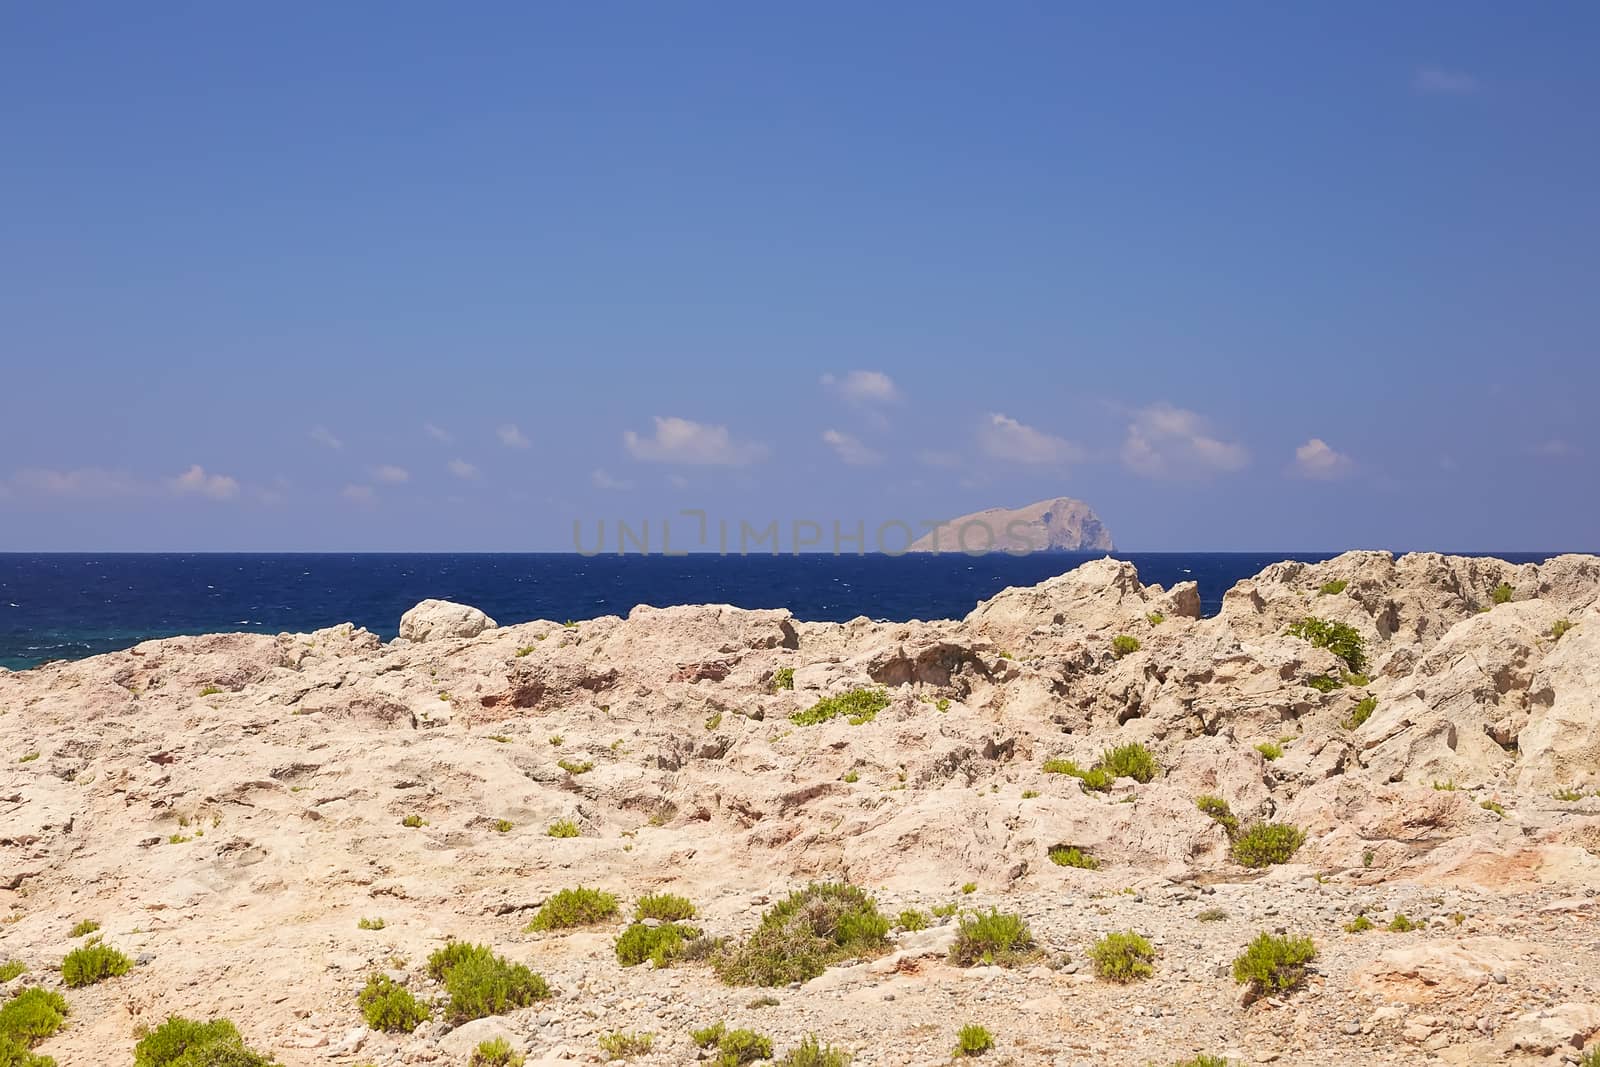 GRAMVOUSA - BALOS, THE CRETE ISLAND, GREECE - JUNE 4, 2019: Beautiful seaview at the beach of the pirate island of Gramvousa. The island is famous for its pirate castle on the top of the mountain.